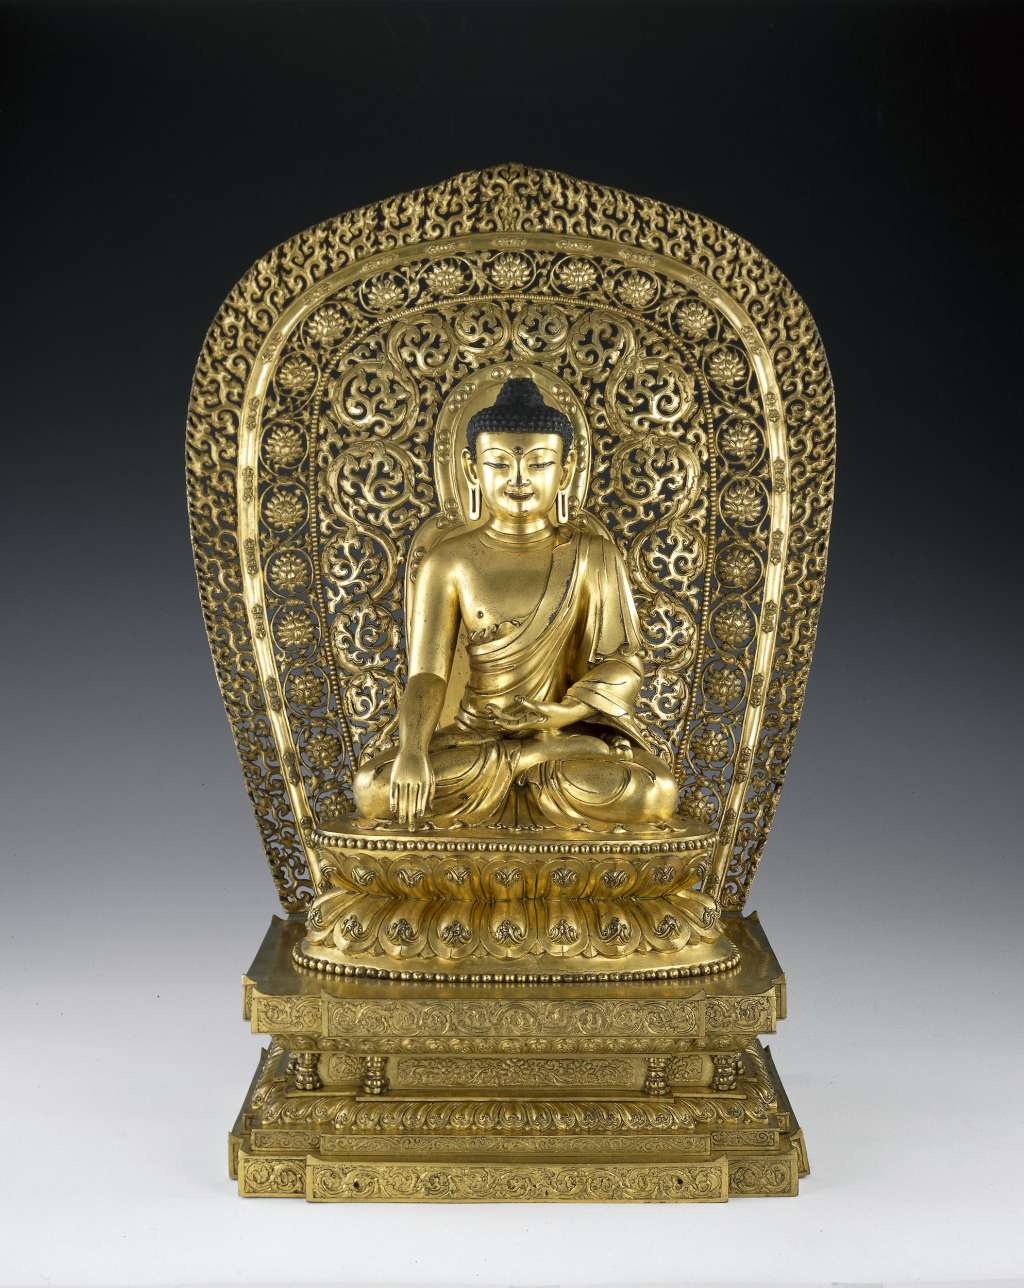 Gilt bronze Buddha figure with six-character Yongle mark. Height 37 cm.  1908,0420.4. Copyright, The Trustees of the British Museum. (Throne and halo believed to be of the Qing dynasty)